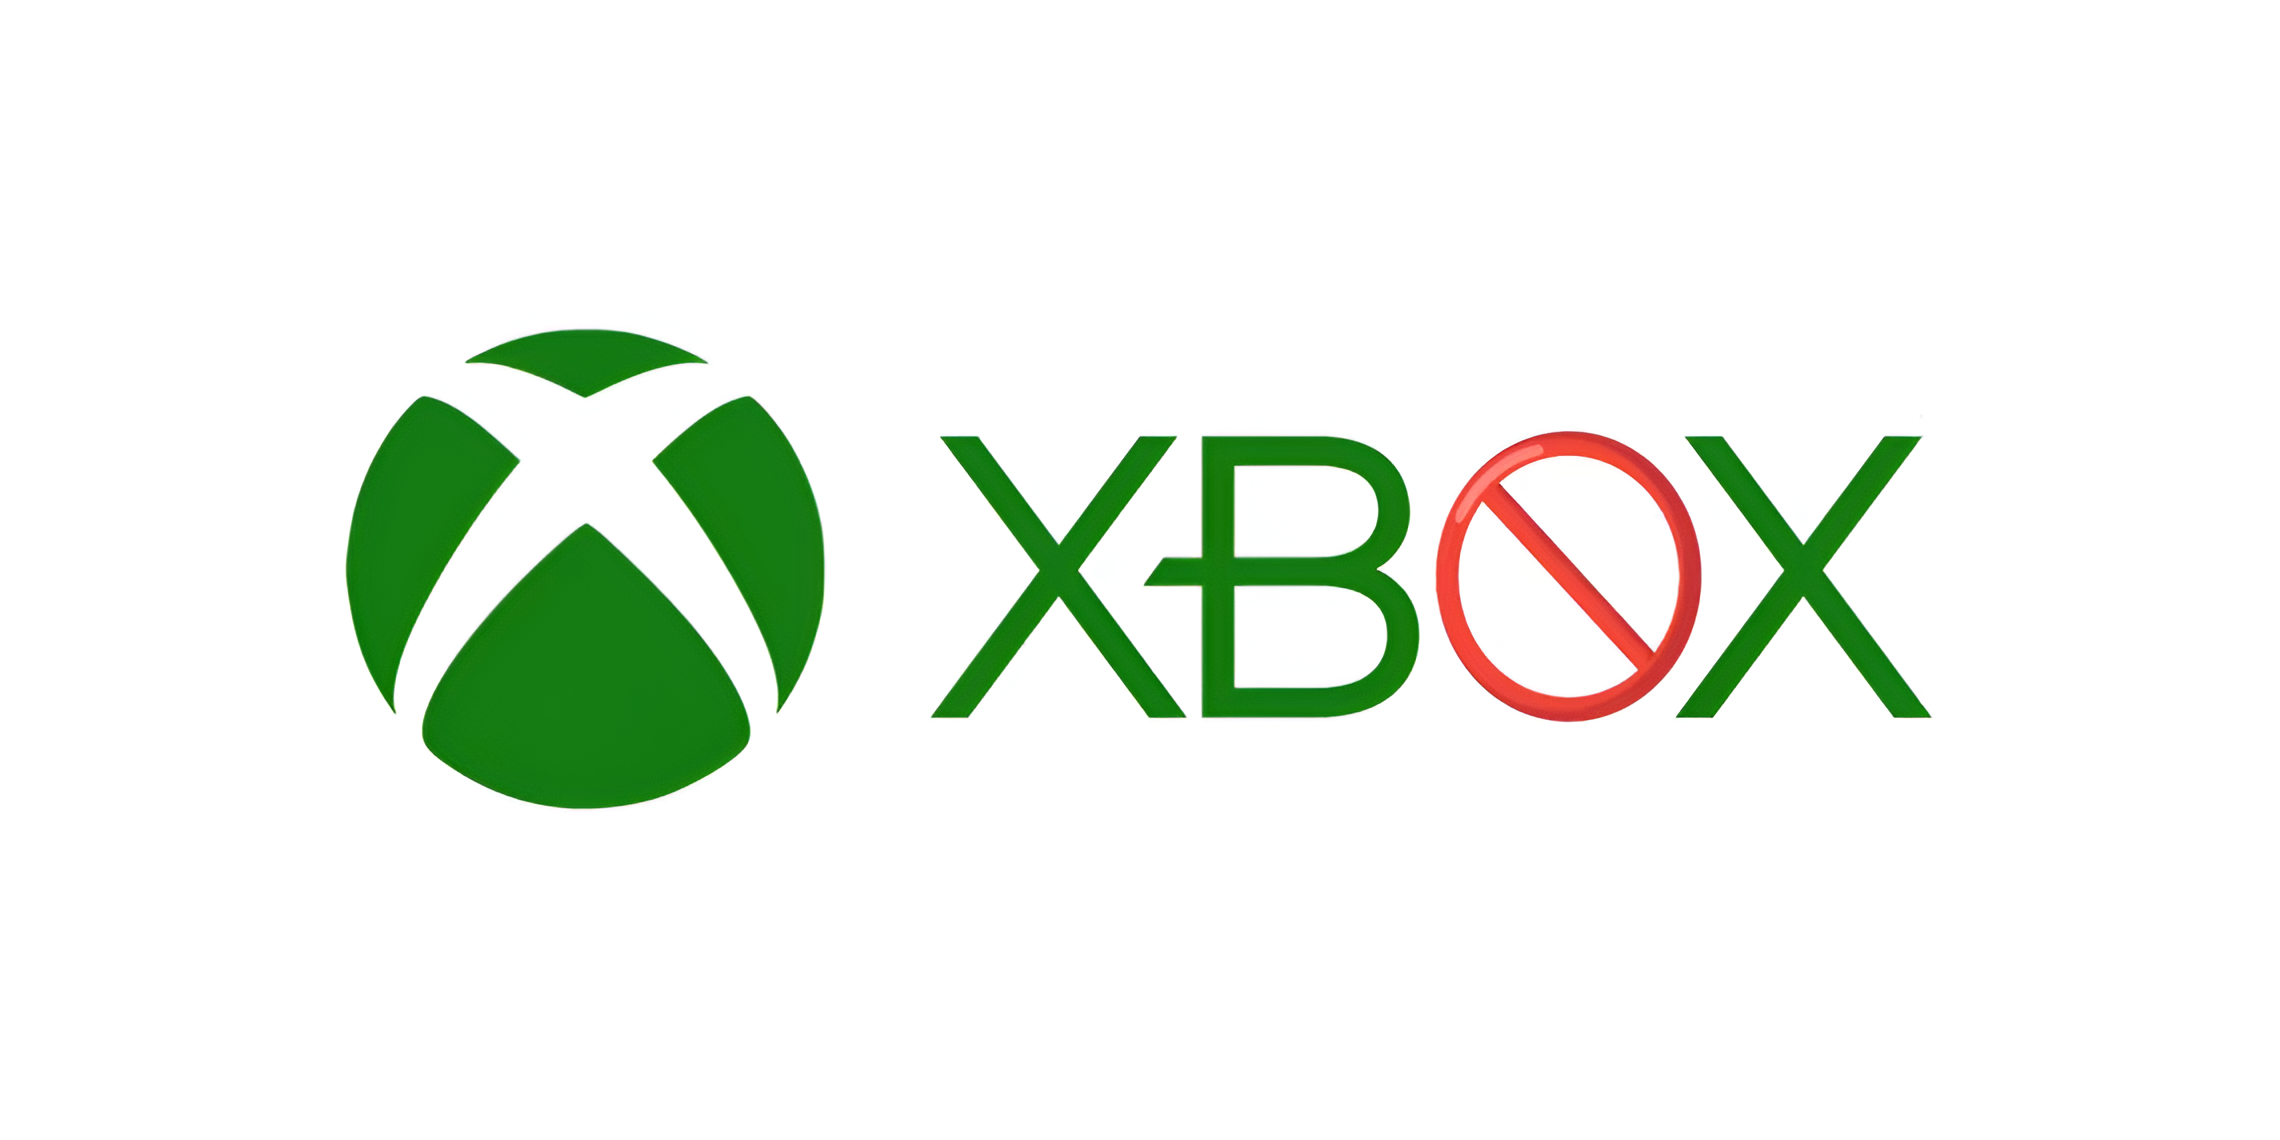 green-xbox-logo-emblem-with-red-crossed-out-o-sign